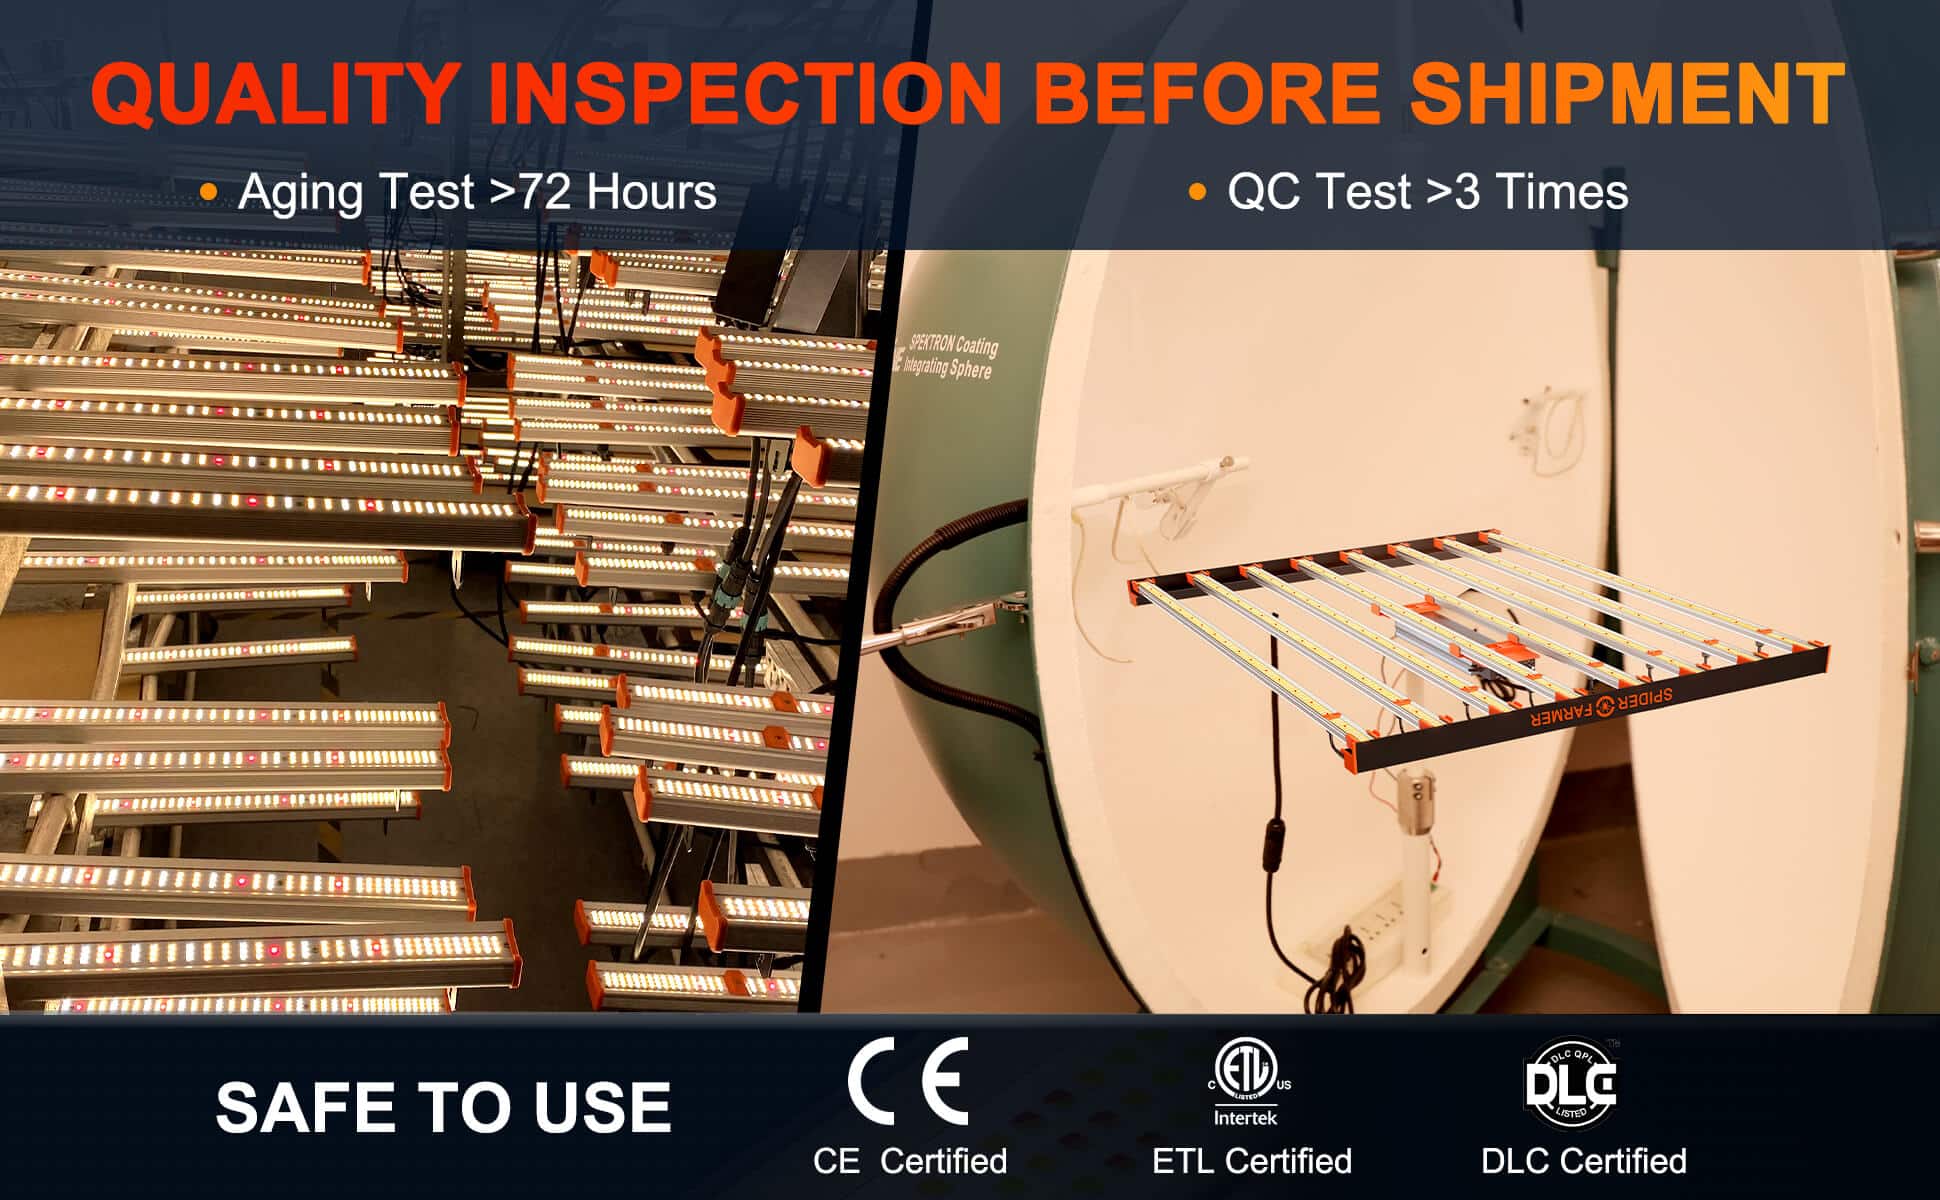 se7000 Quality-Inspection-Before-Shipment